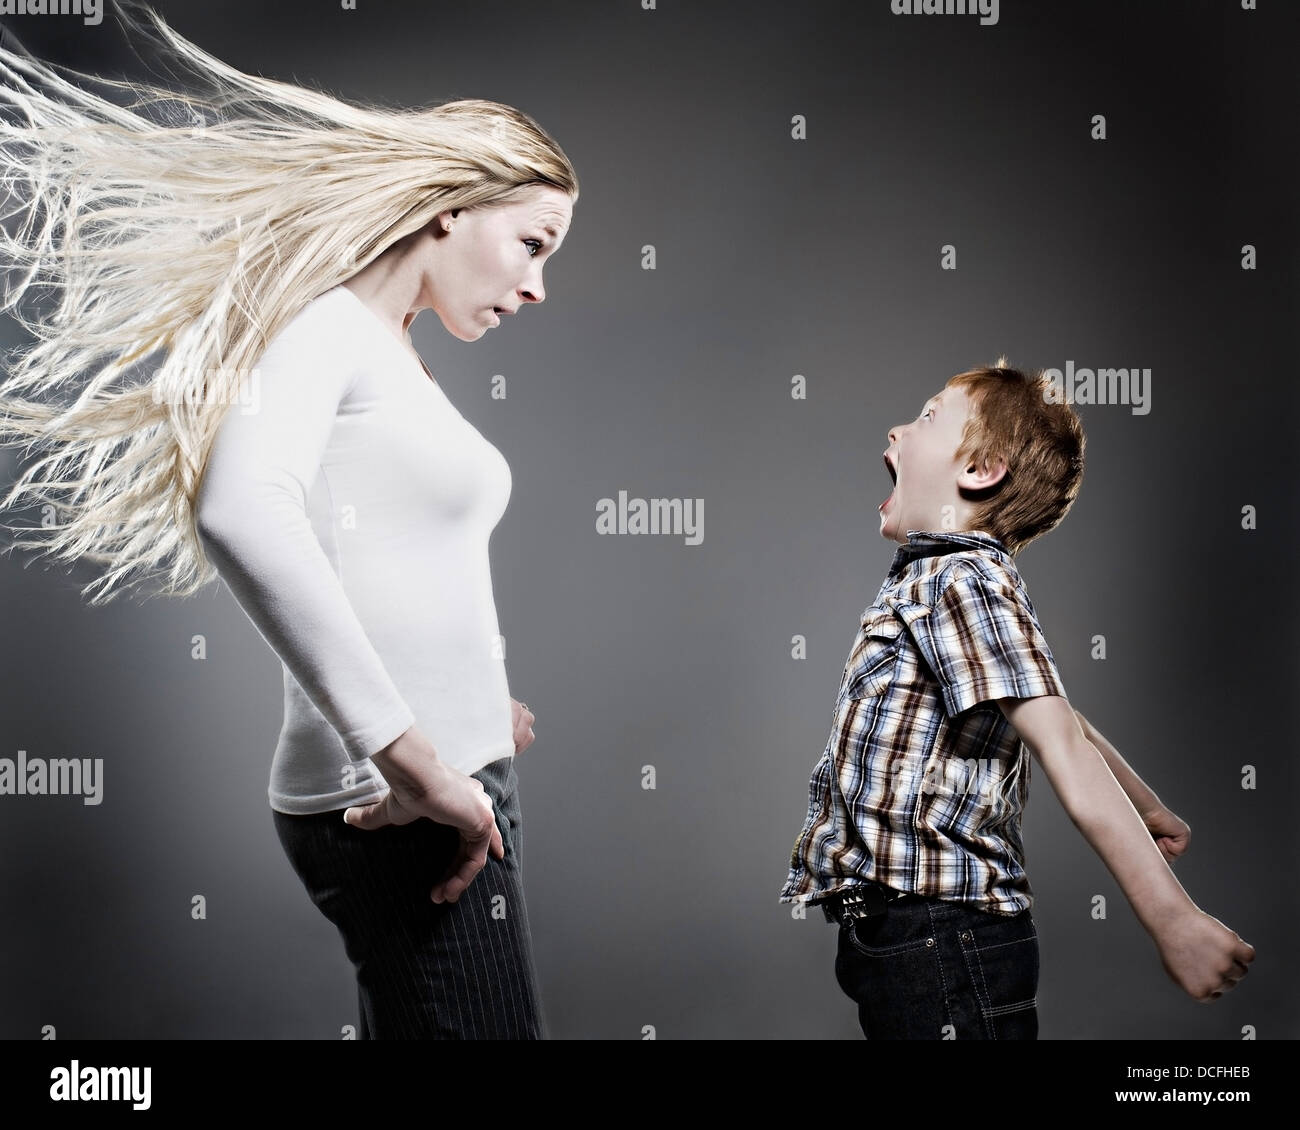 Boy Yelling At His Mother As Her Hair Blows Wildly Stock Photo